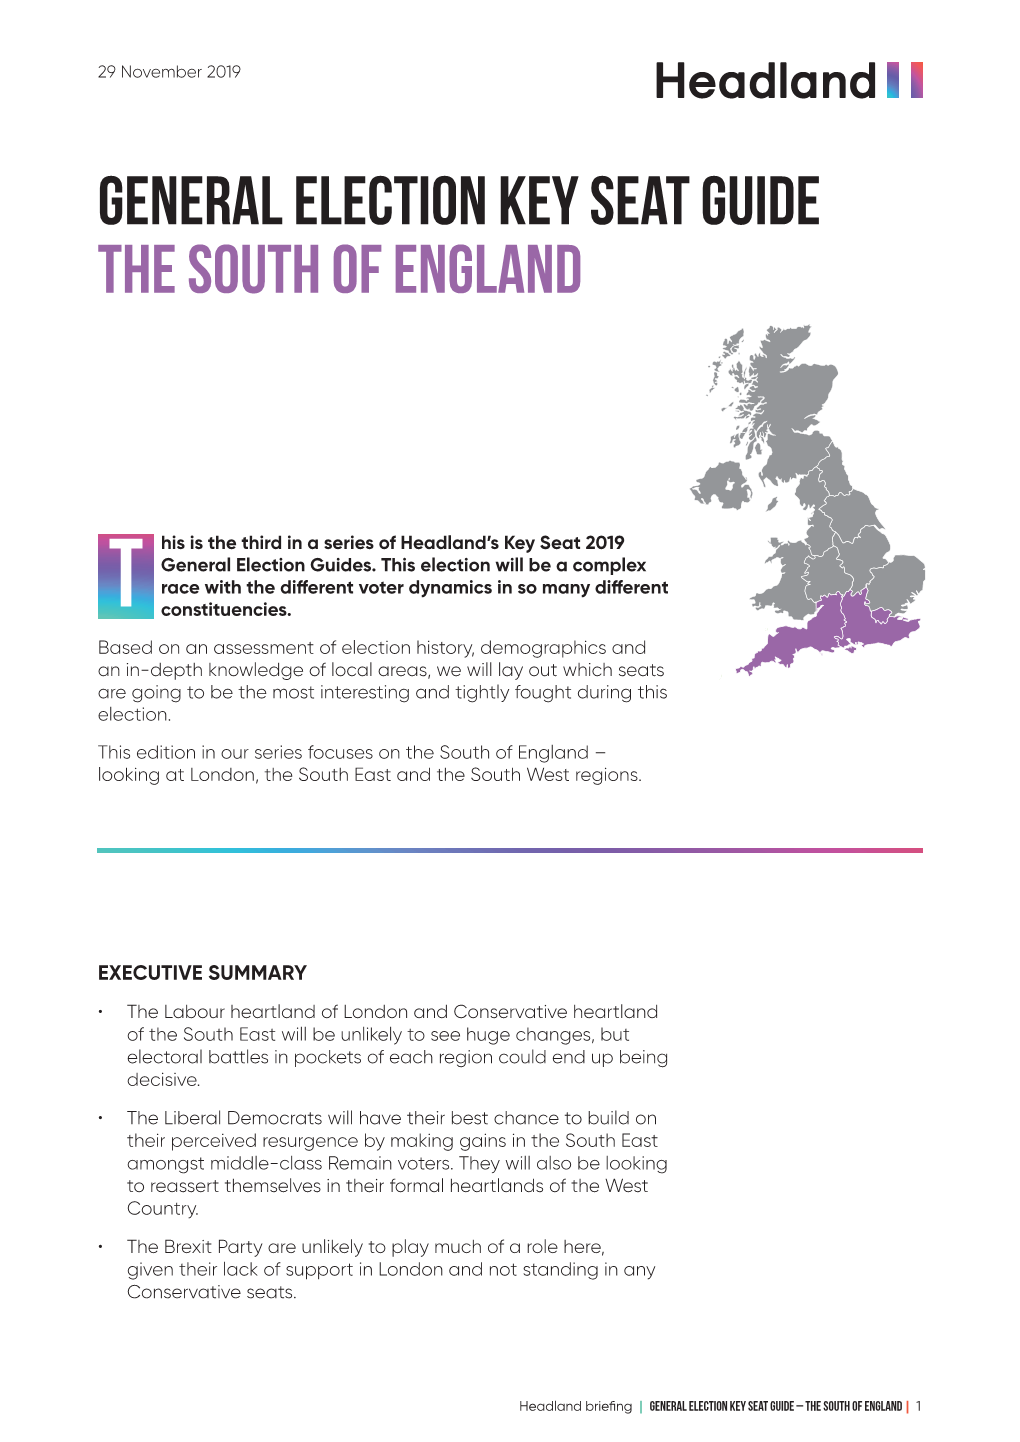 General Election Key Seat Guide the South of England